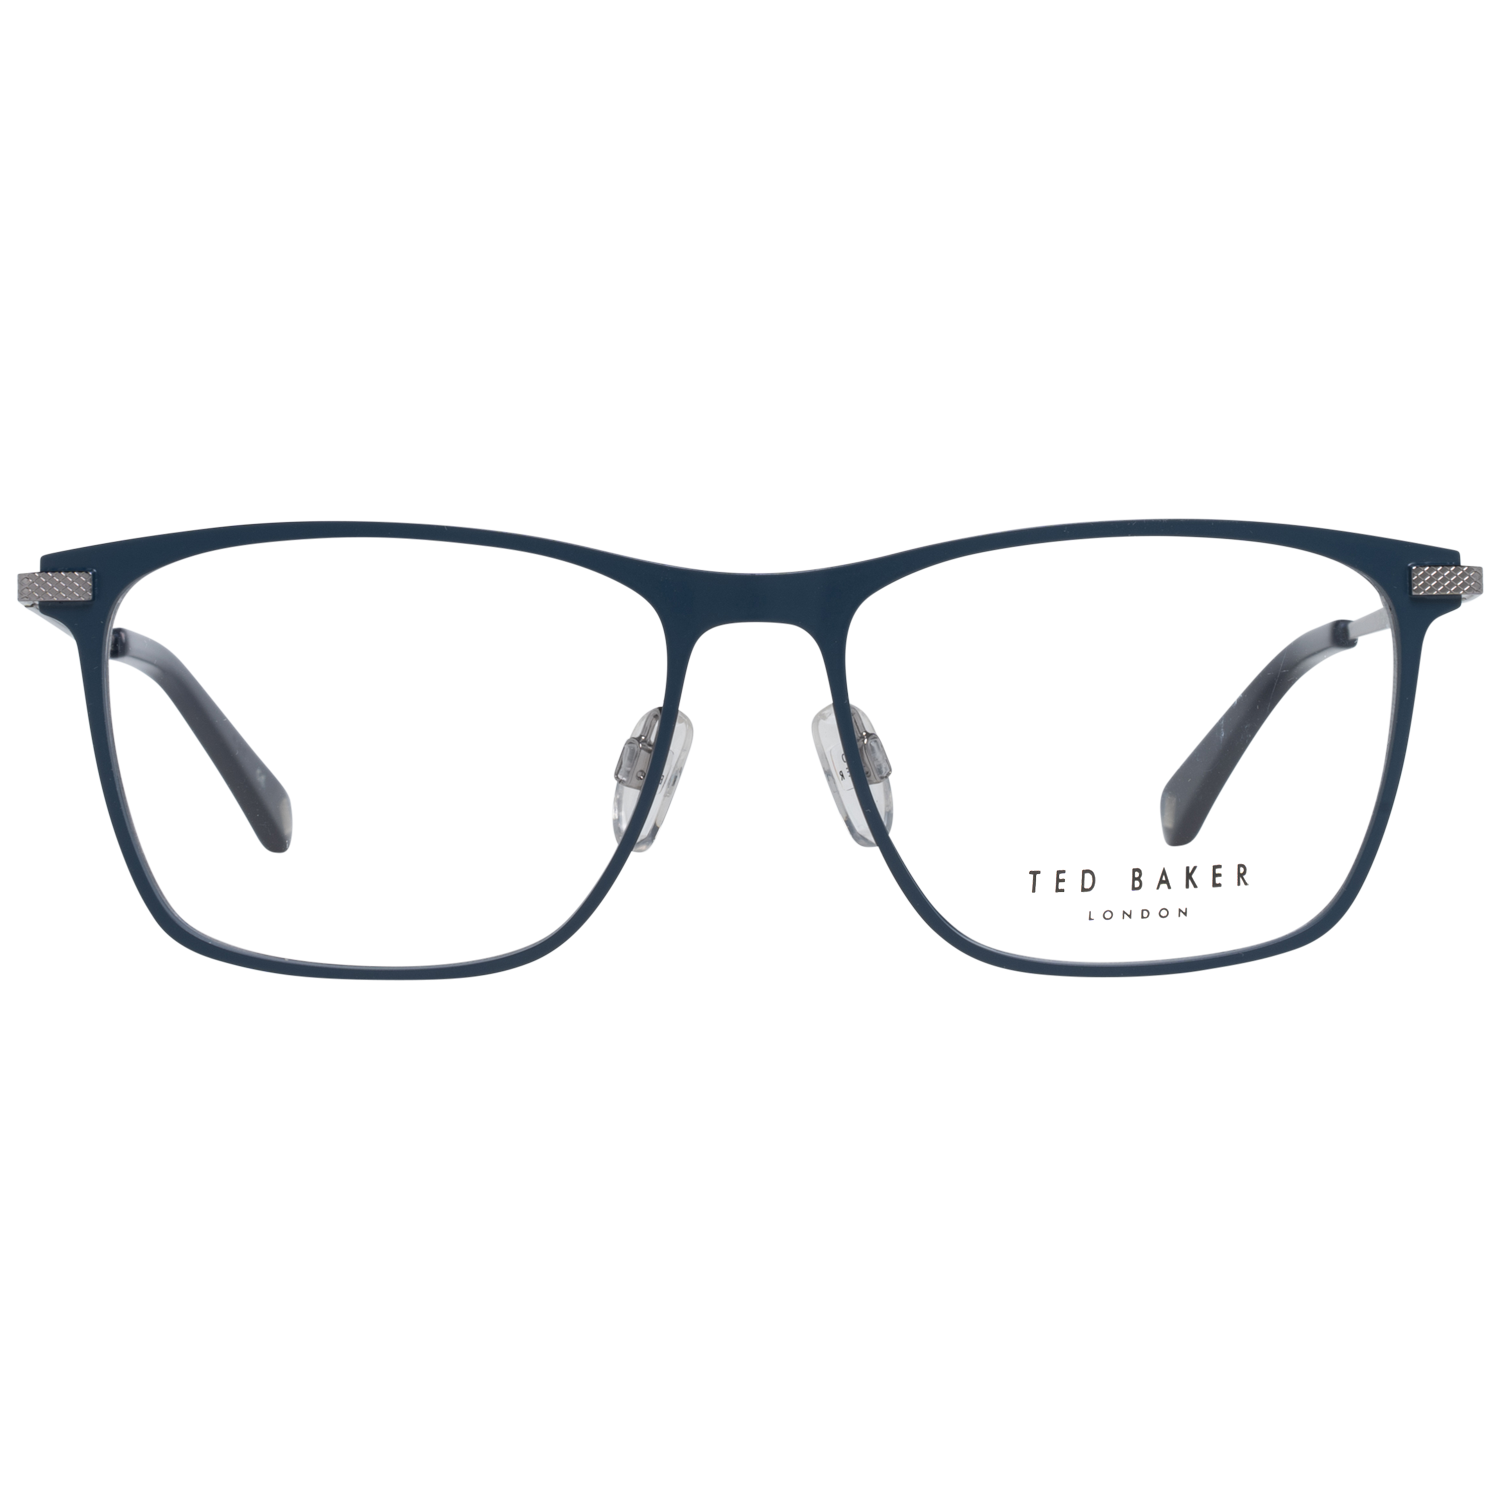 GenderMenMain colorBlueFrame colorBlueFrame materialMetalSize55-16-140Lenses width55mmLenses heigth40mmBridge length16mmFrame width143mmTemple length140mmShipment includesCase, Cleaning clothStyleFull-RimSpring hingeYes